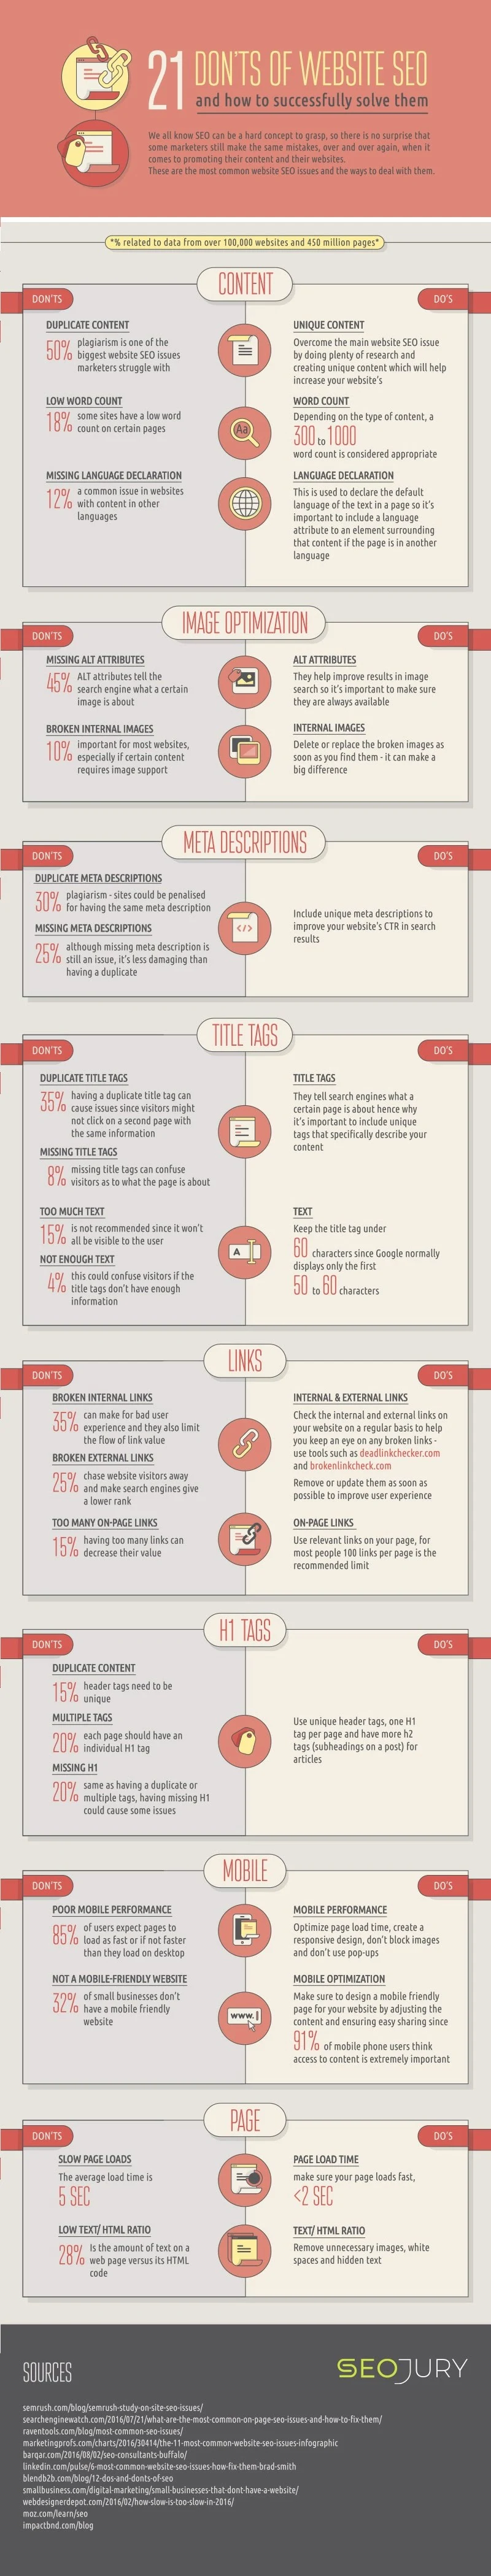 21 Don’ts of Website SEO - #Infographic